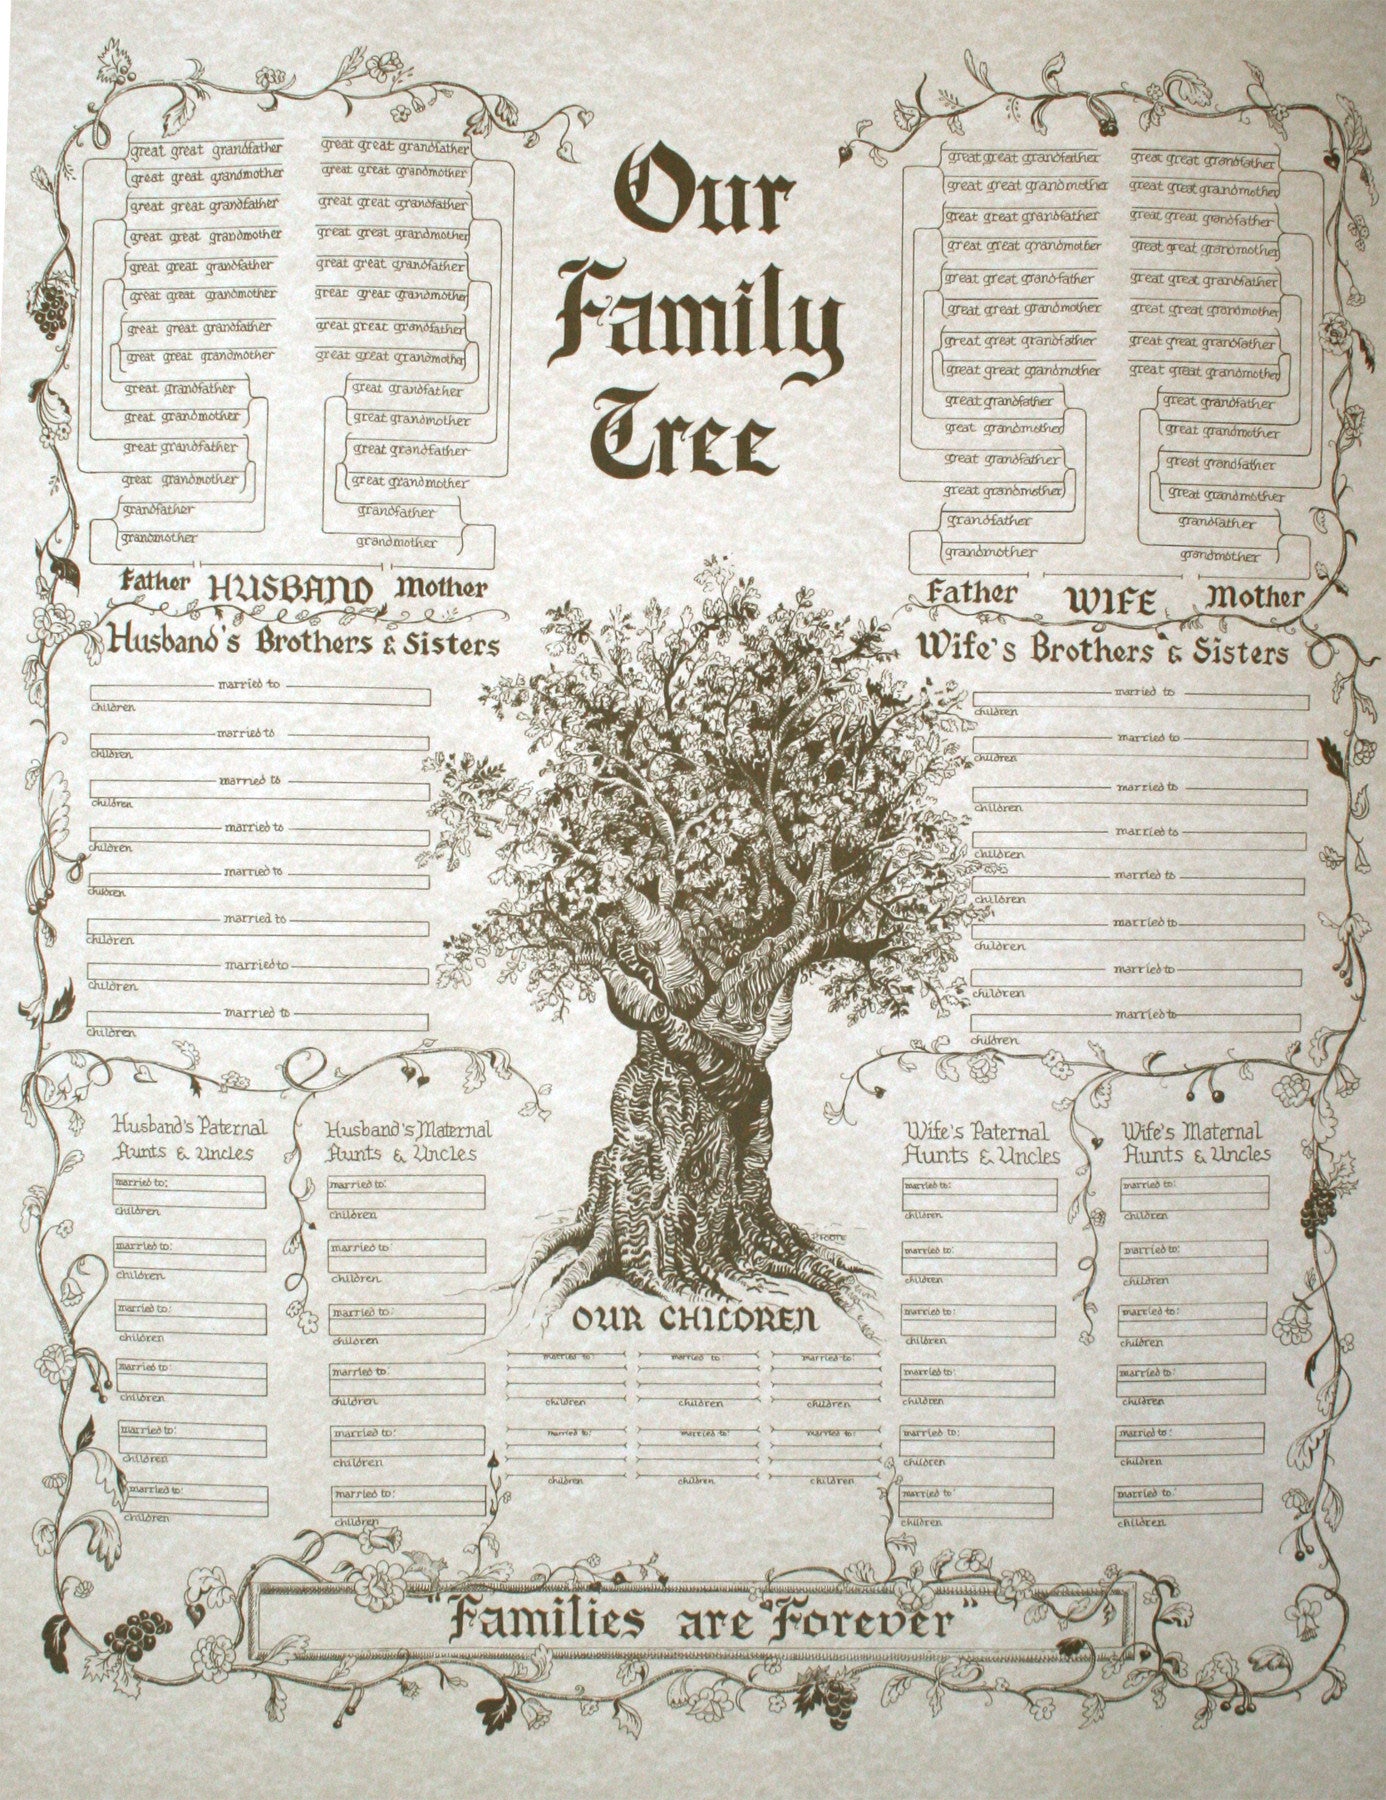 Our Family Tree - Families are Forever